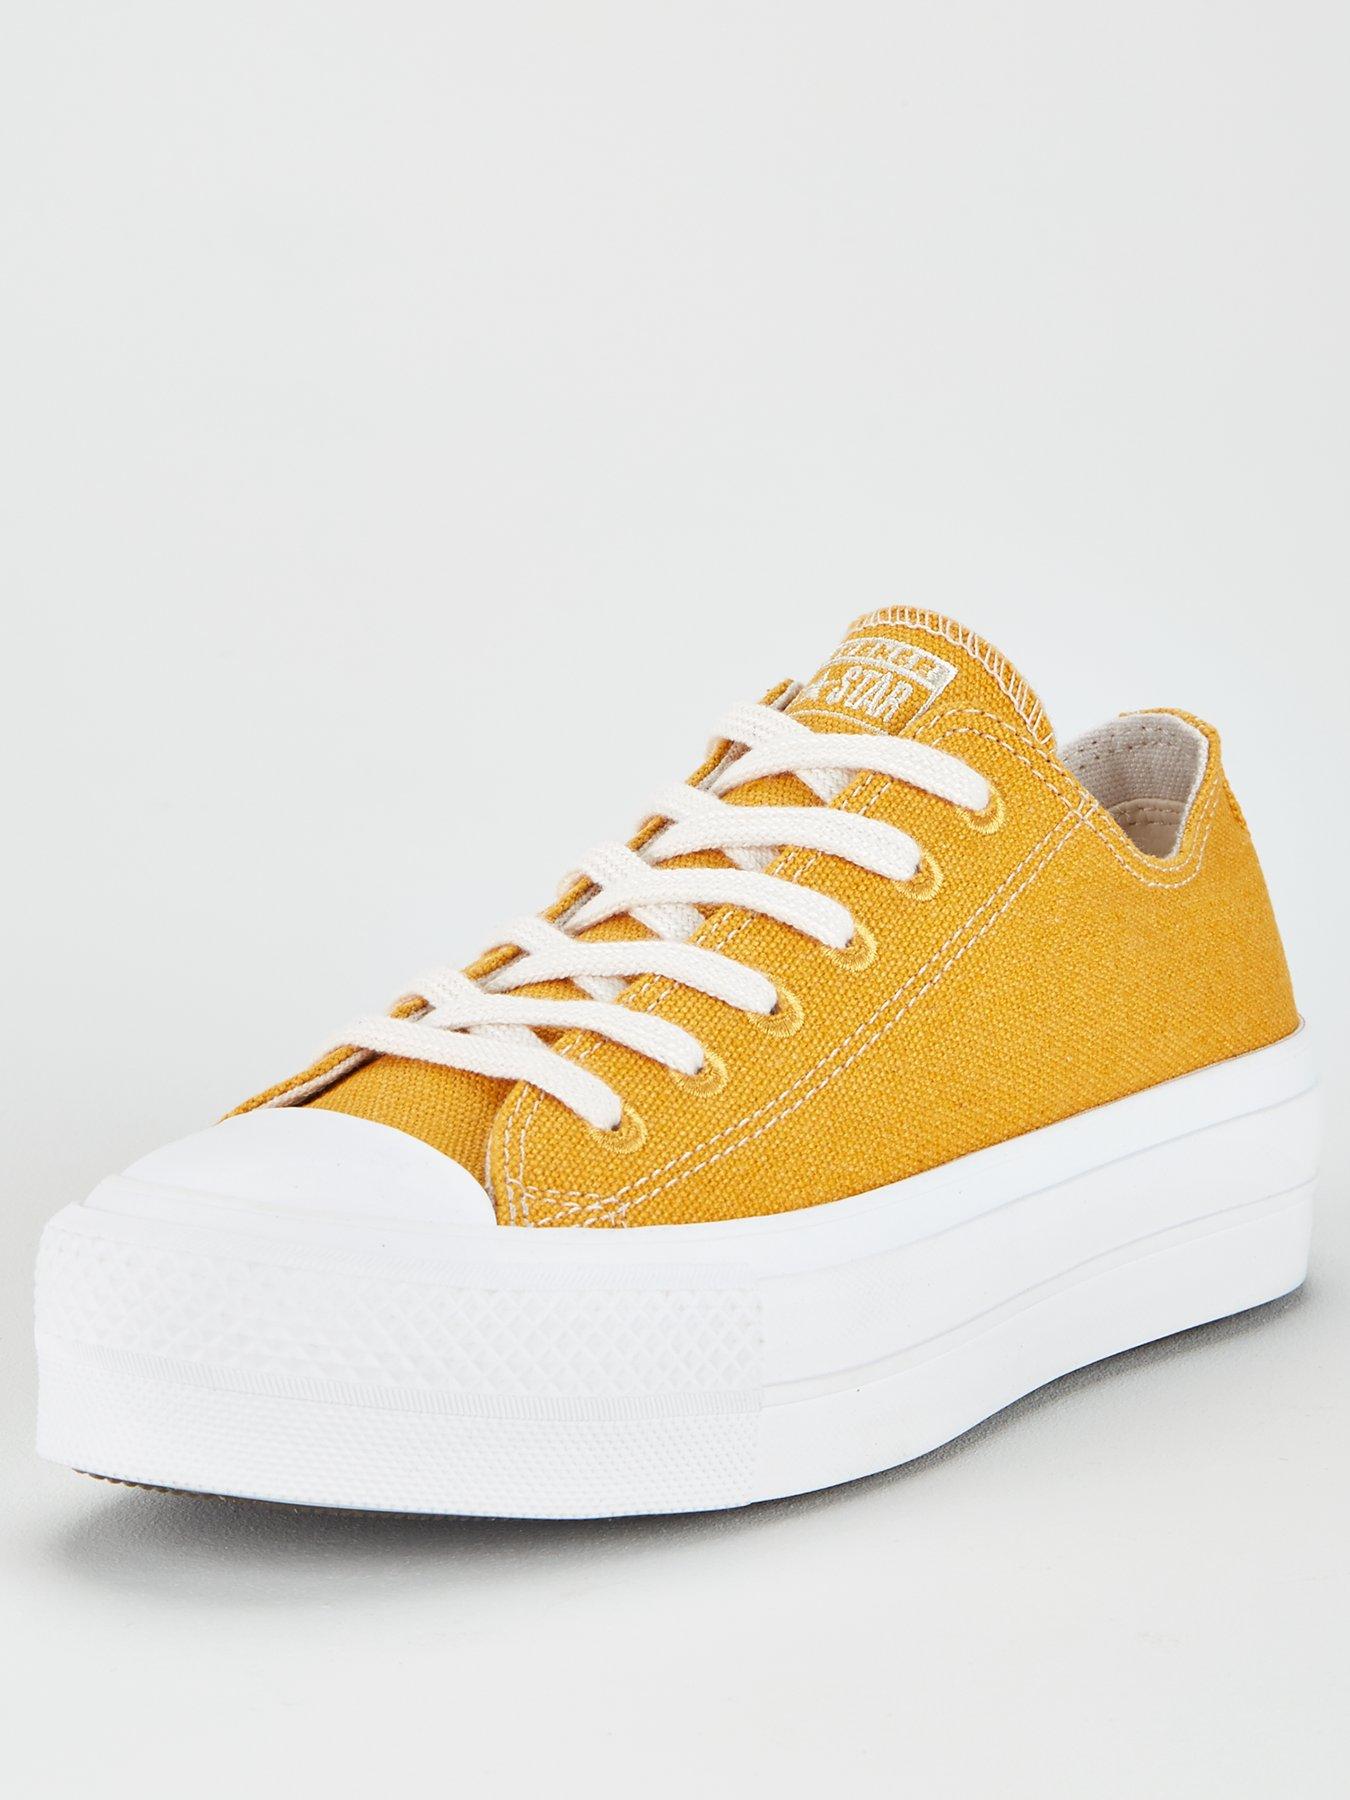 converse chuck taylor all star dainty ox embossed crafted leather